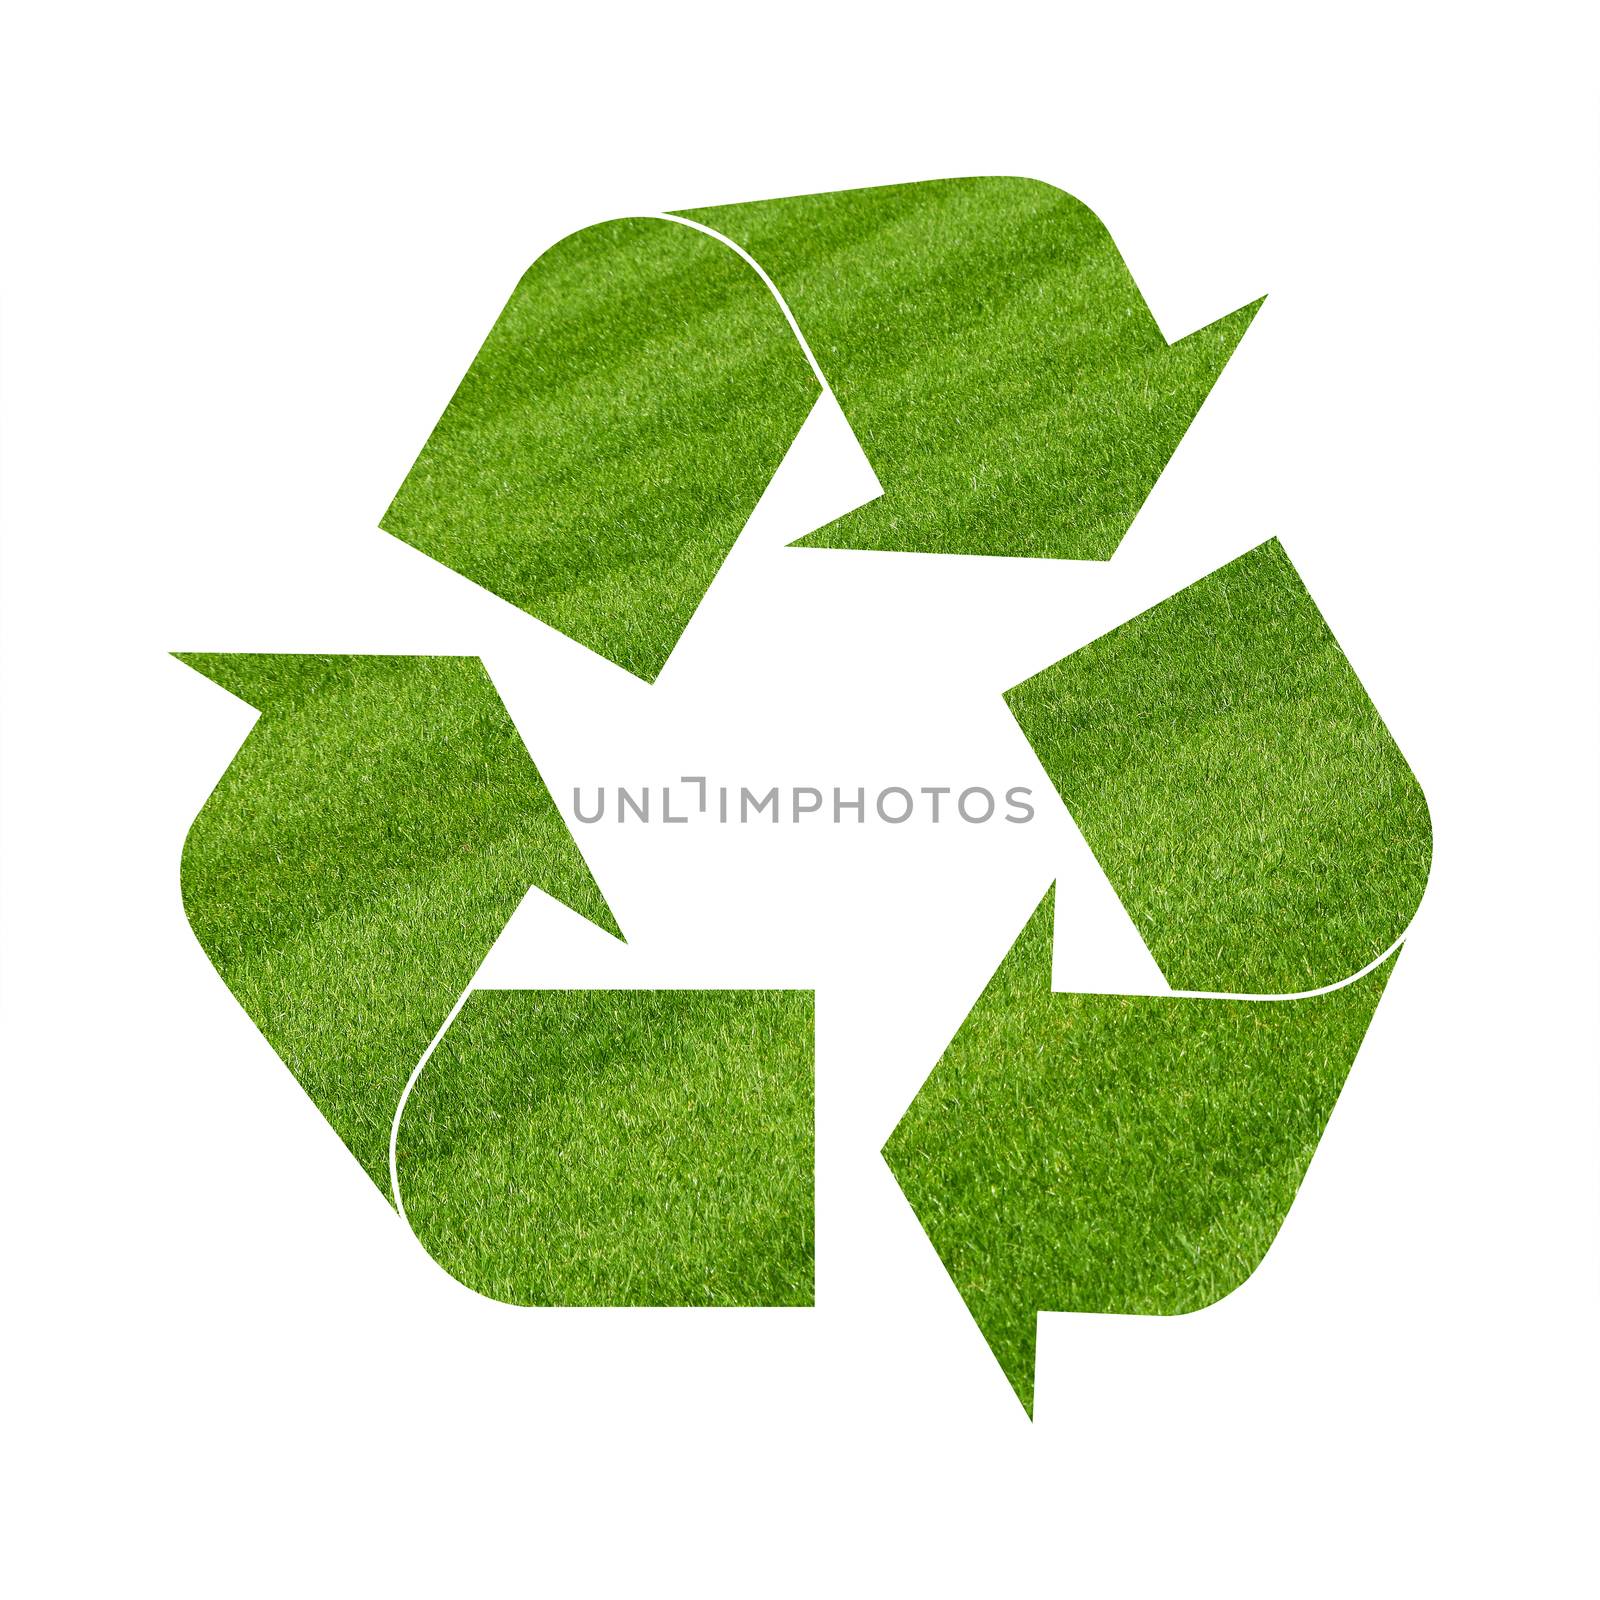 Illustration recycling symbol of green grass isolated on white background